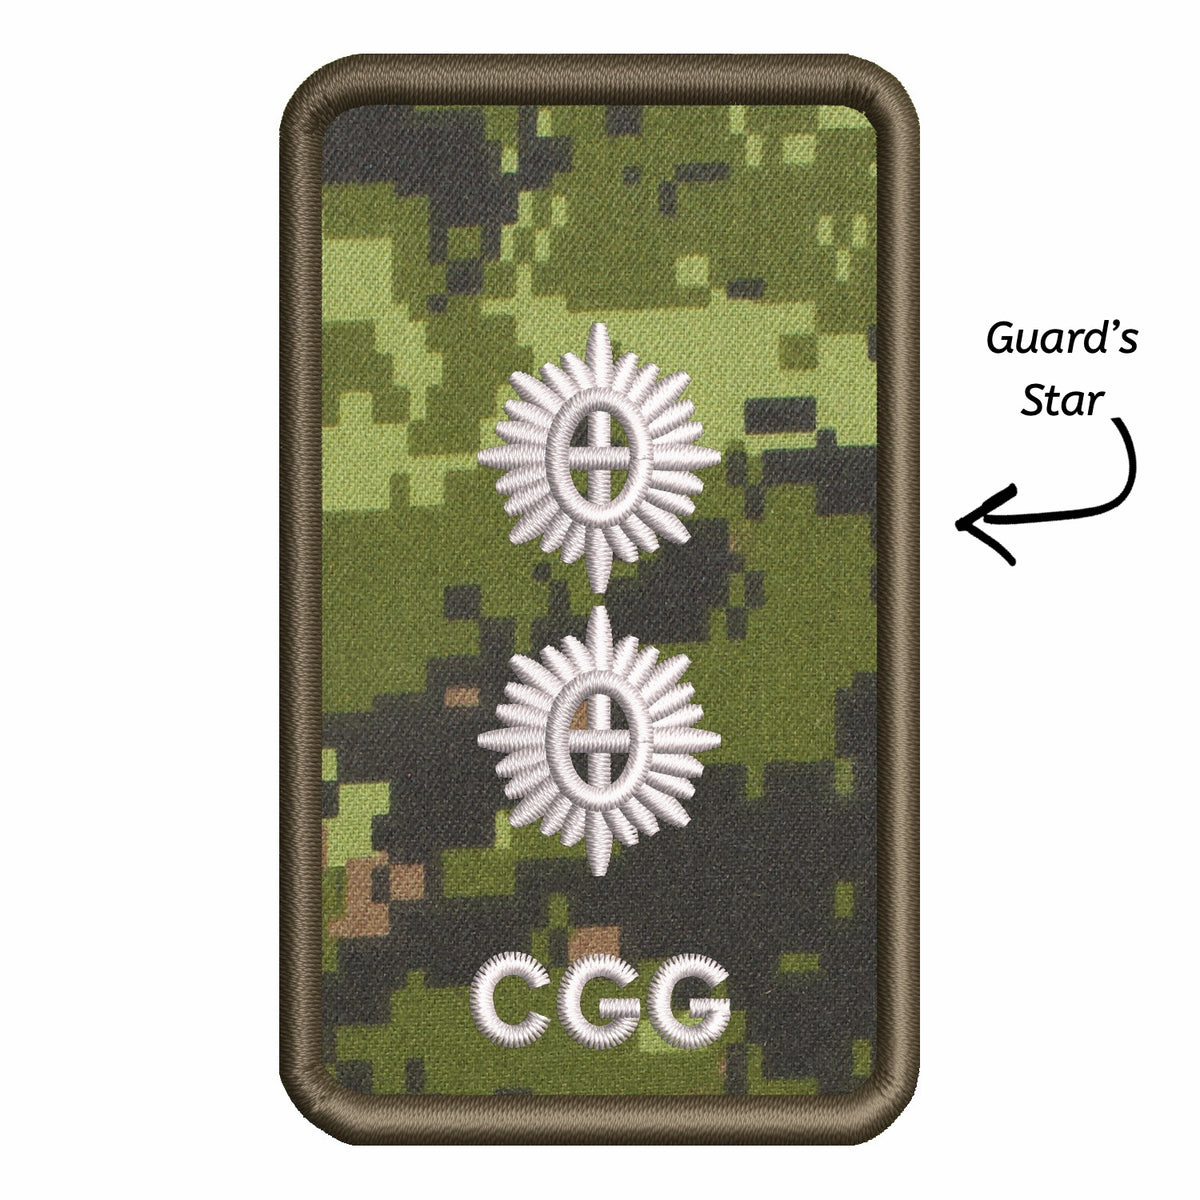 All Rank Patches